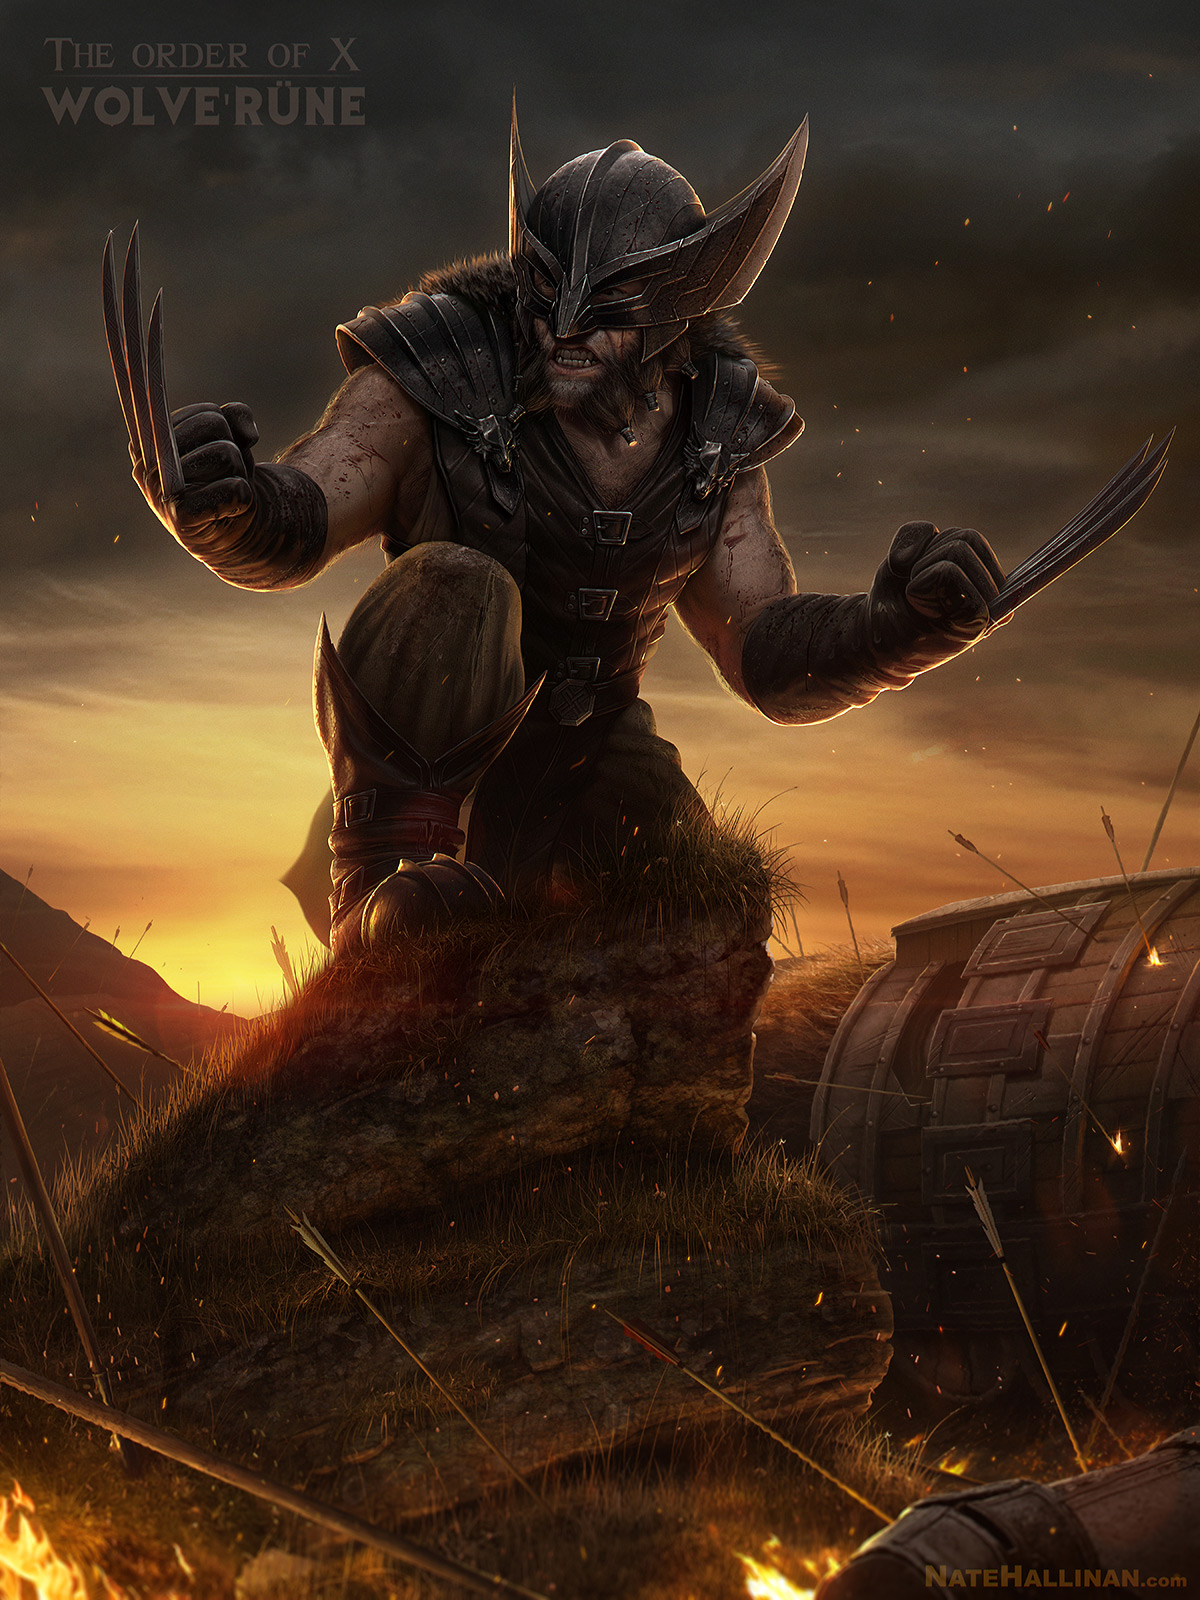 Shadow of Mordor's Dwarven hunter was inspired by Wolverine and